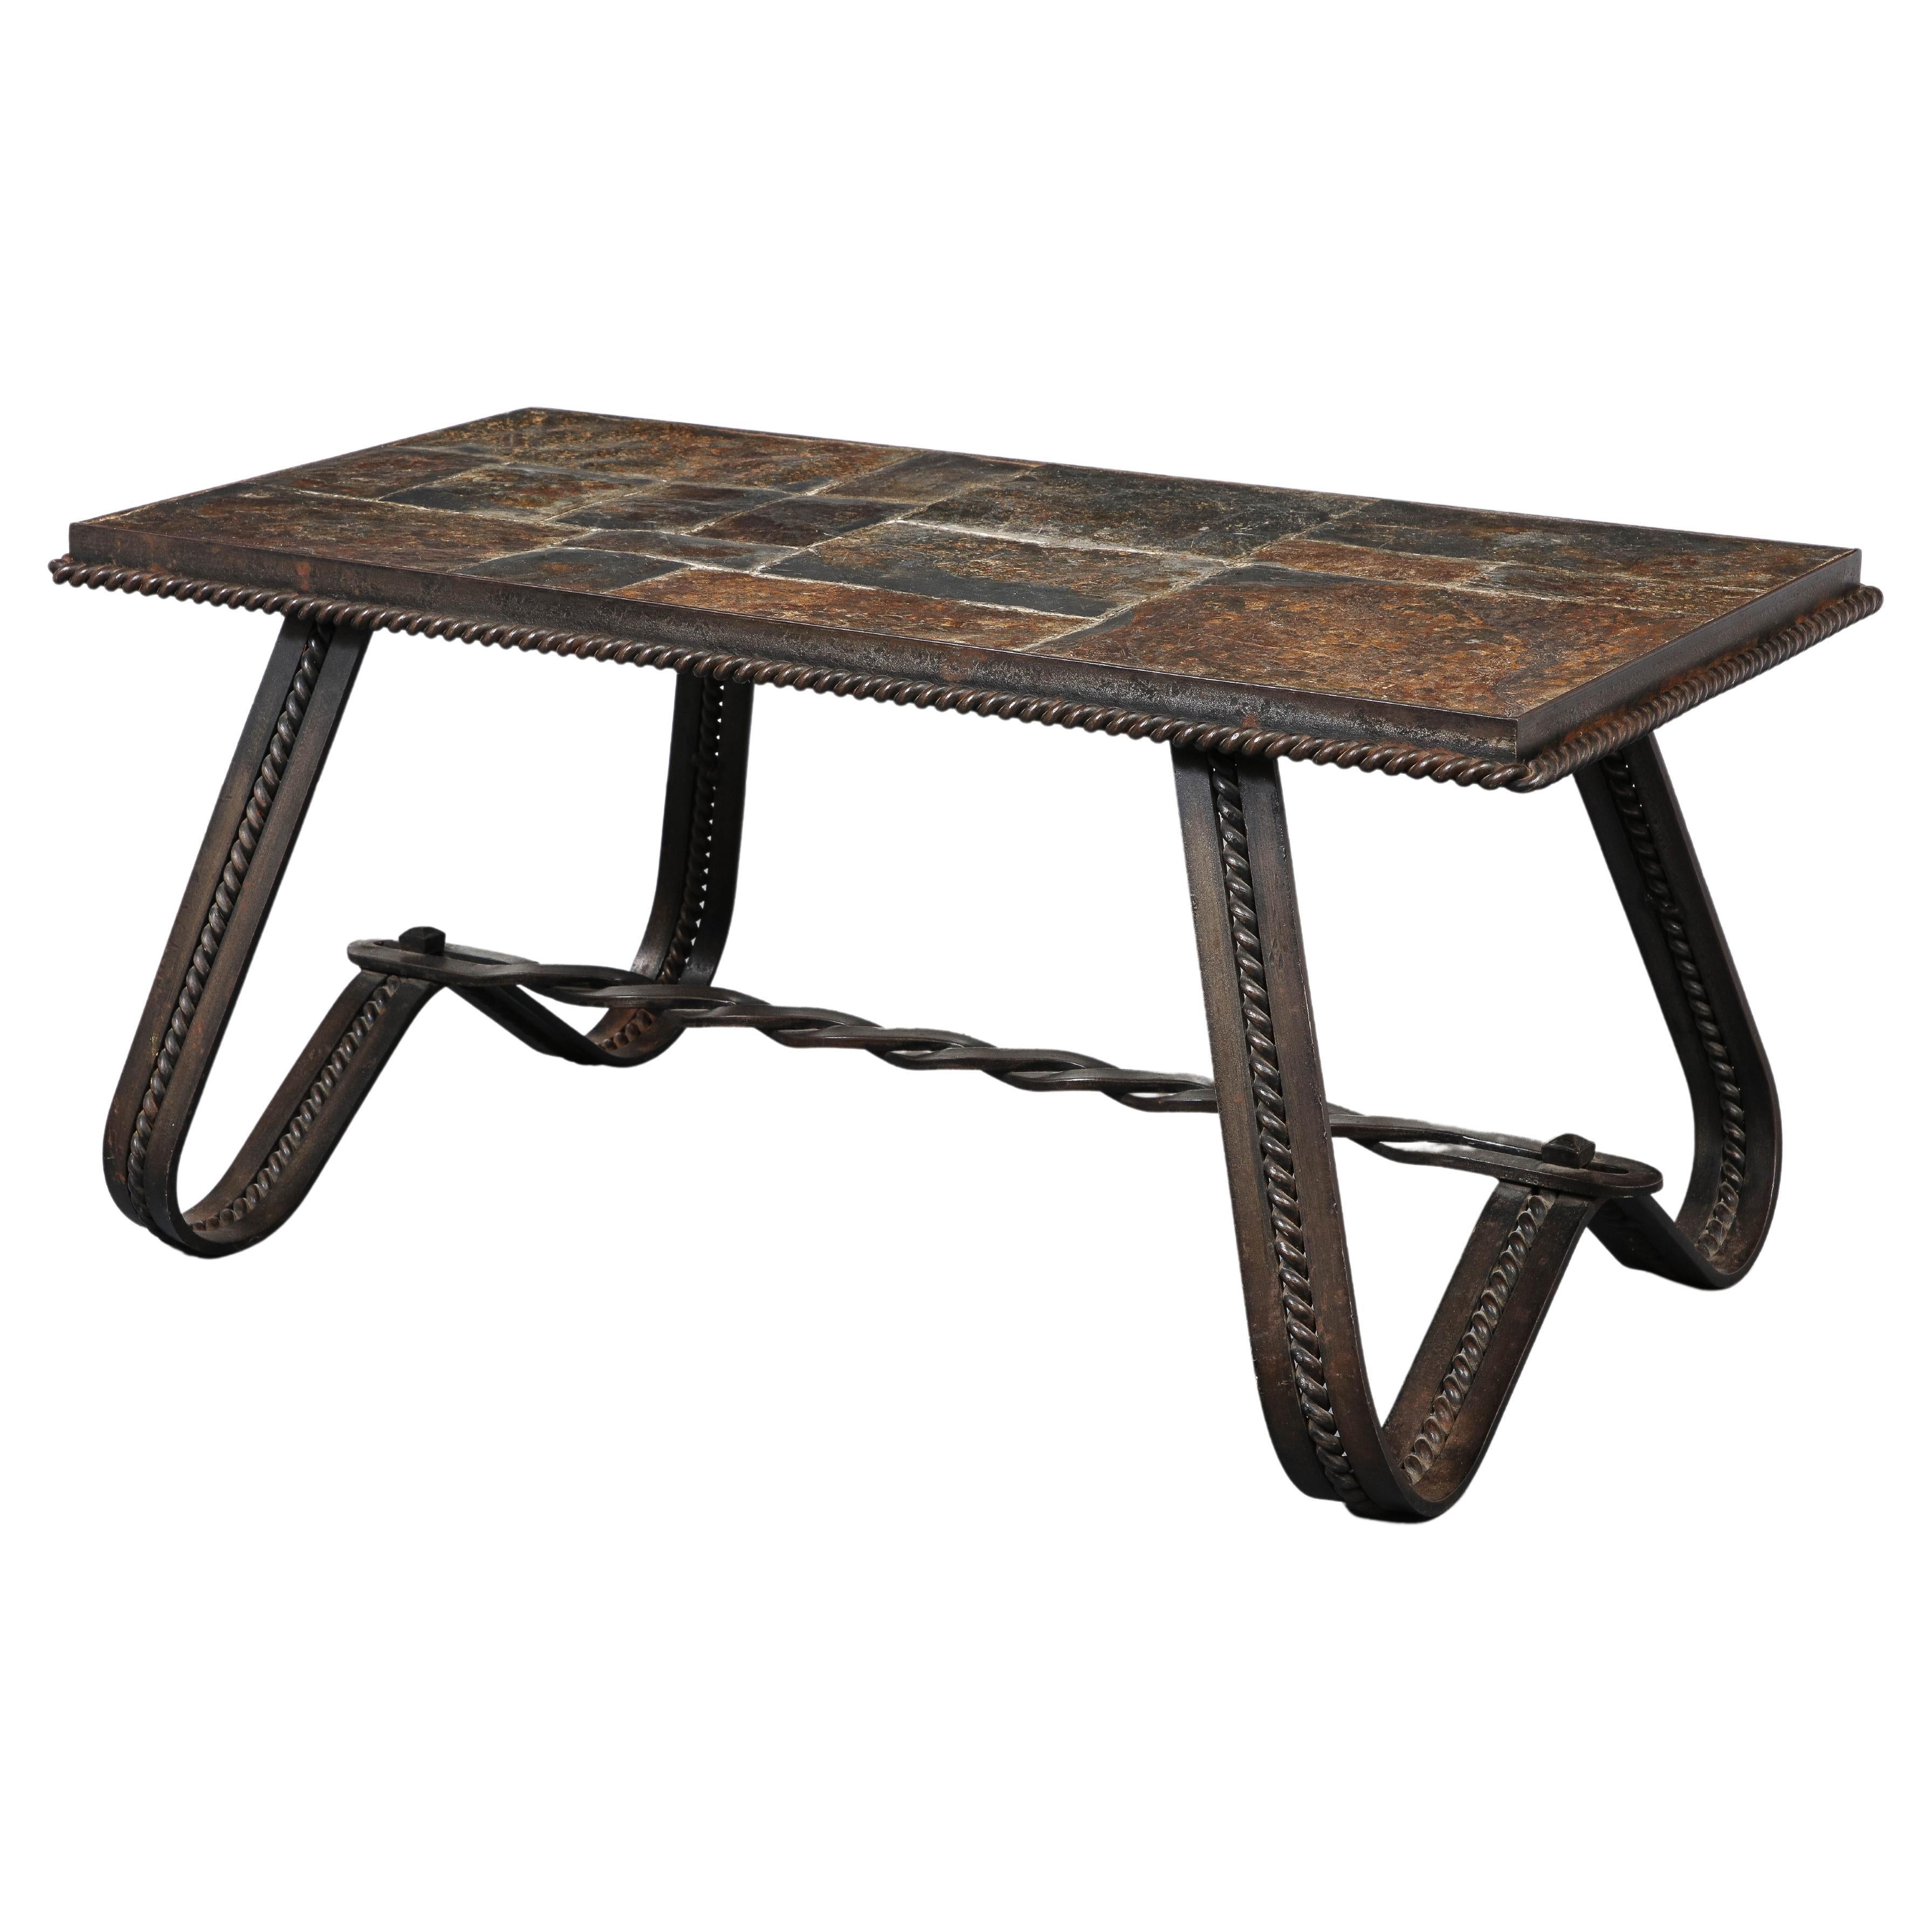 Art Deco Wrought Iron and Slate Coffee Table, France, circa 1930